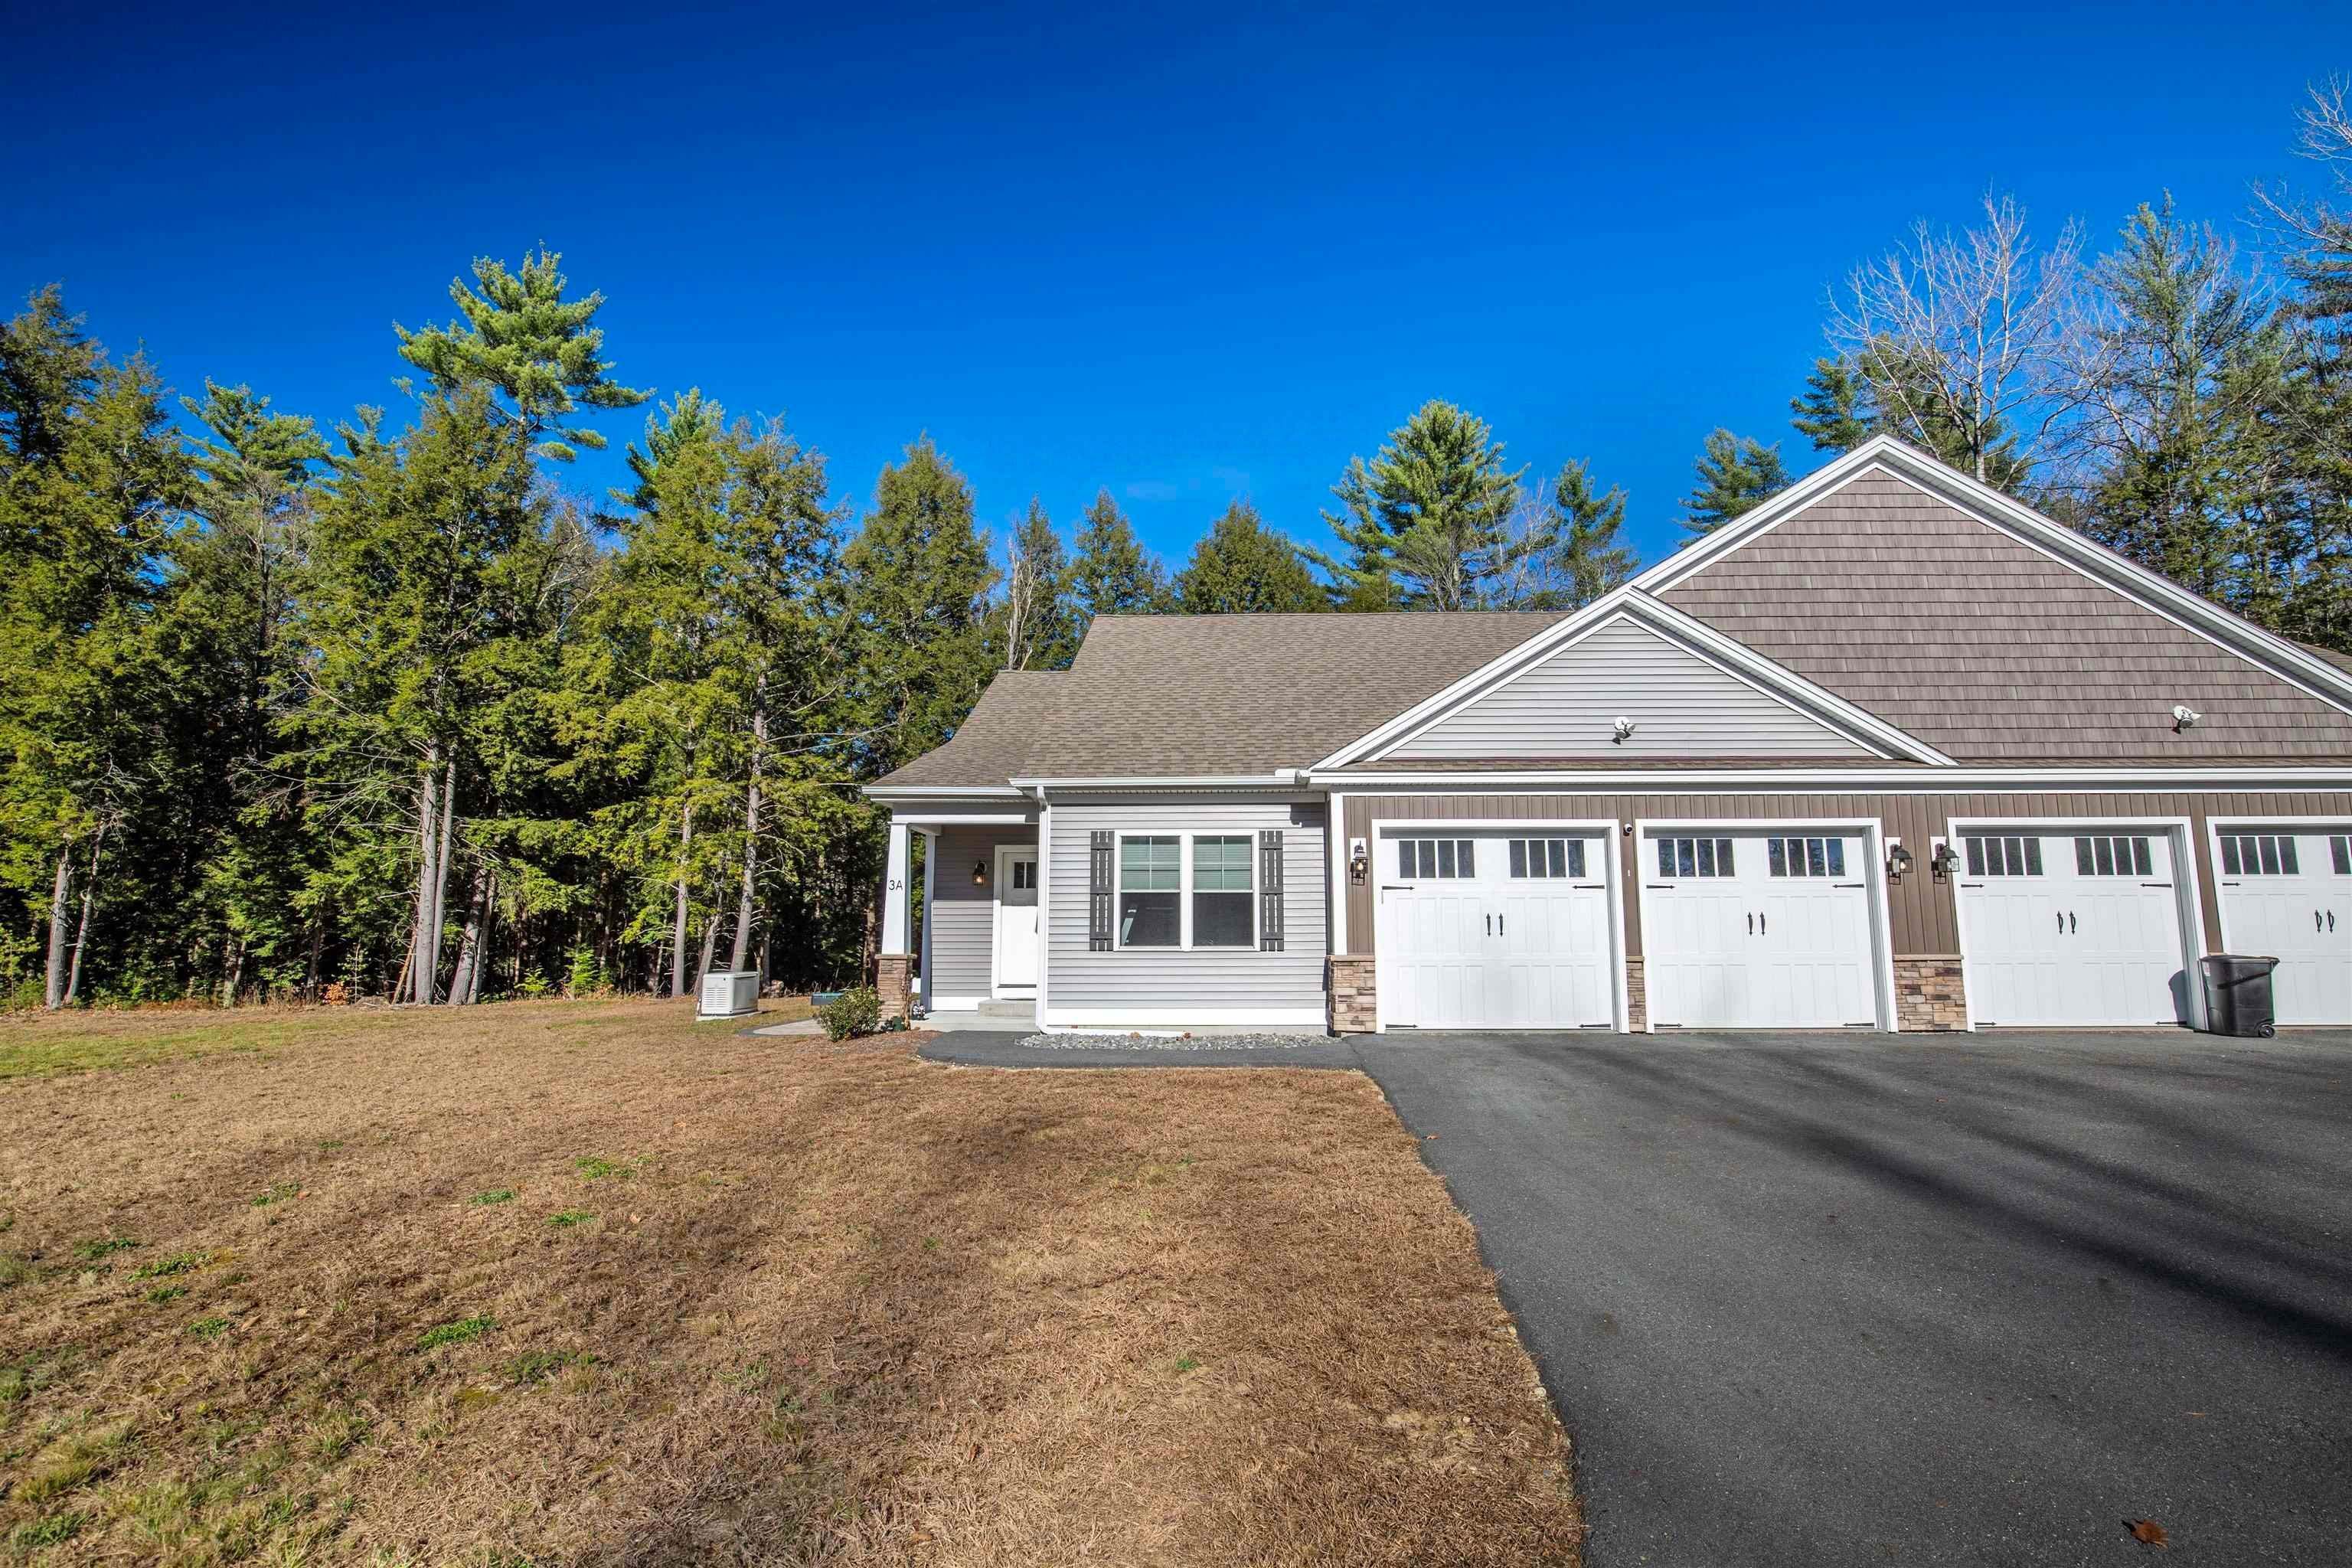 Condominiums for Sale at Swanzey, NH 03446